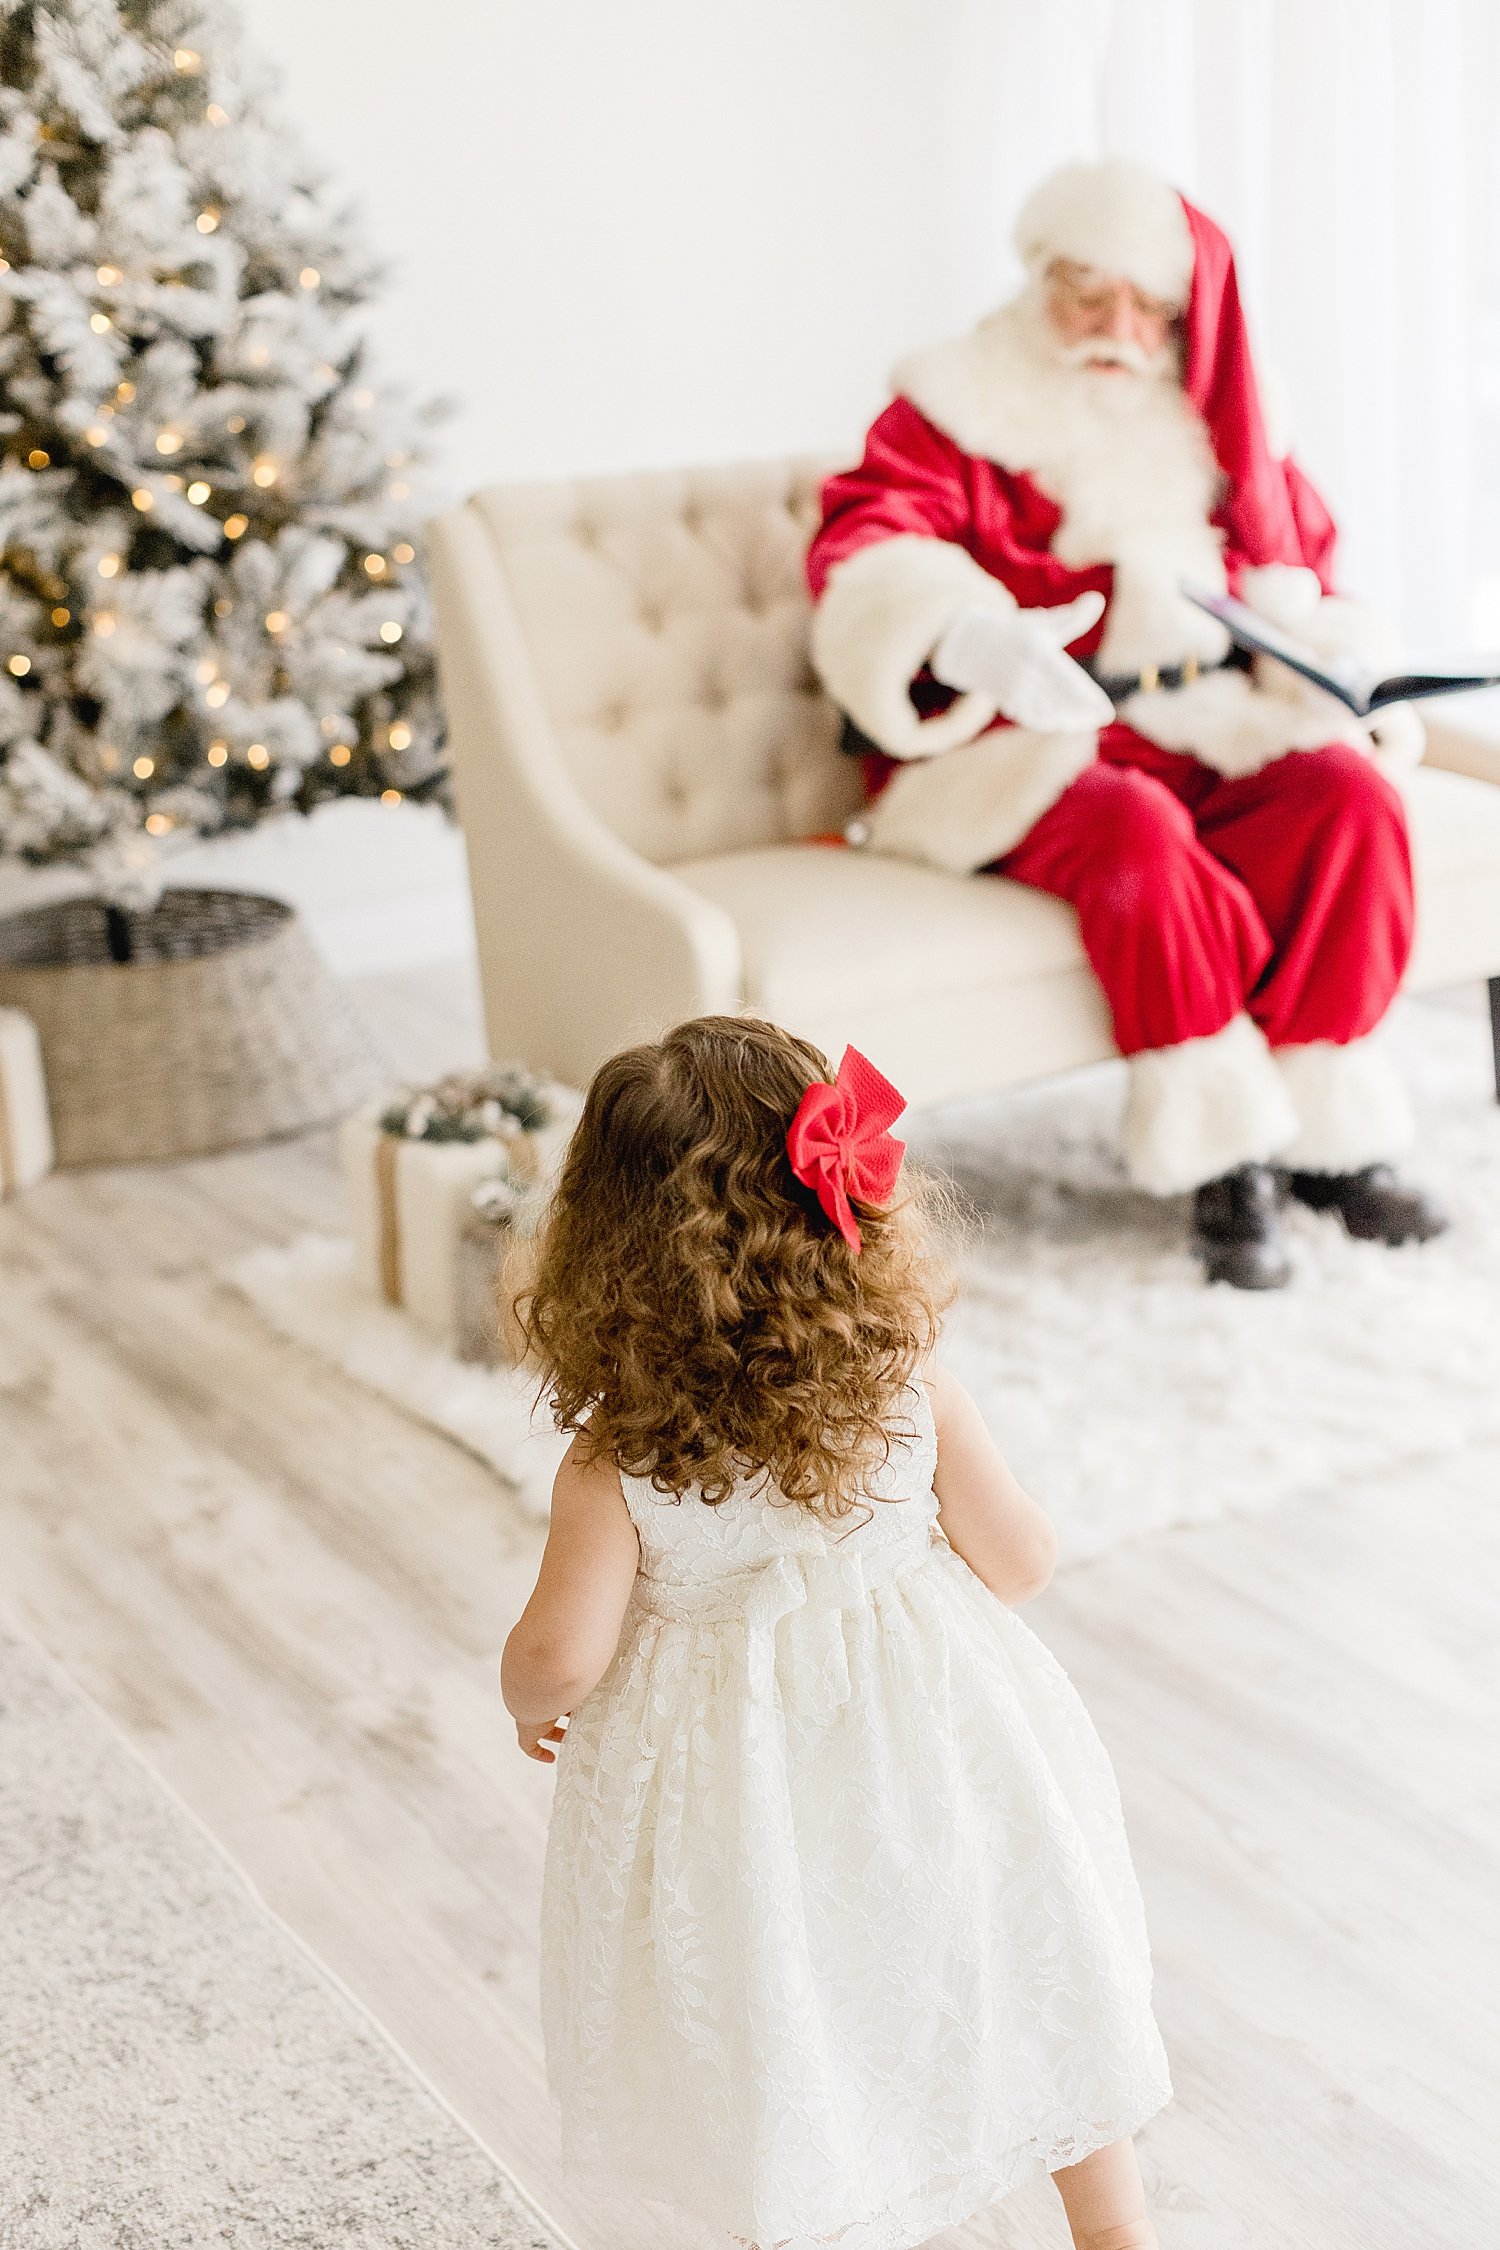 Toddler visiting Santa from a distance  | Ambre Williams Photography